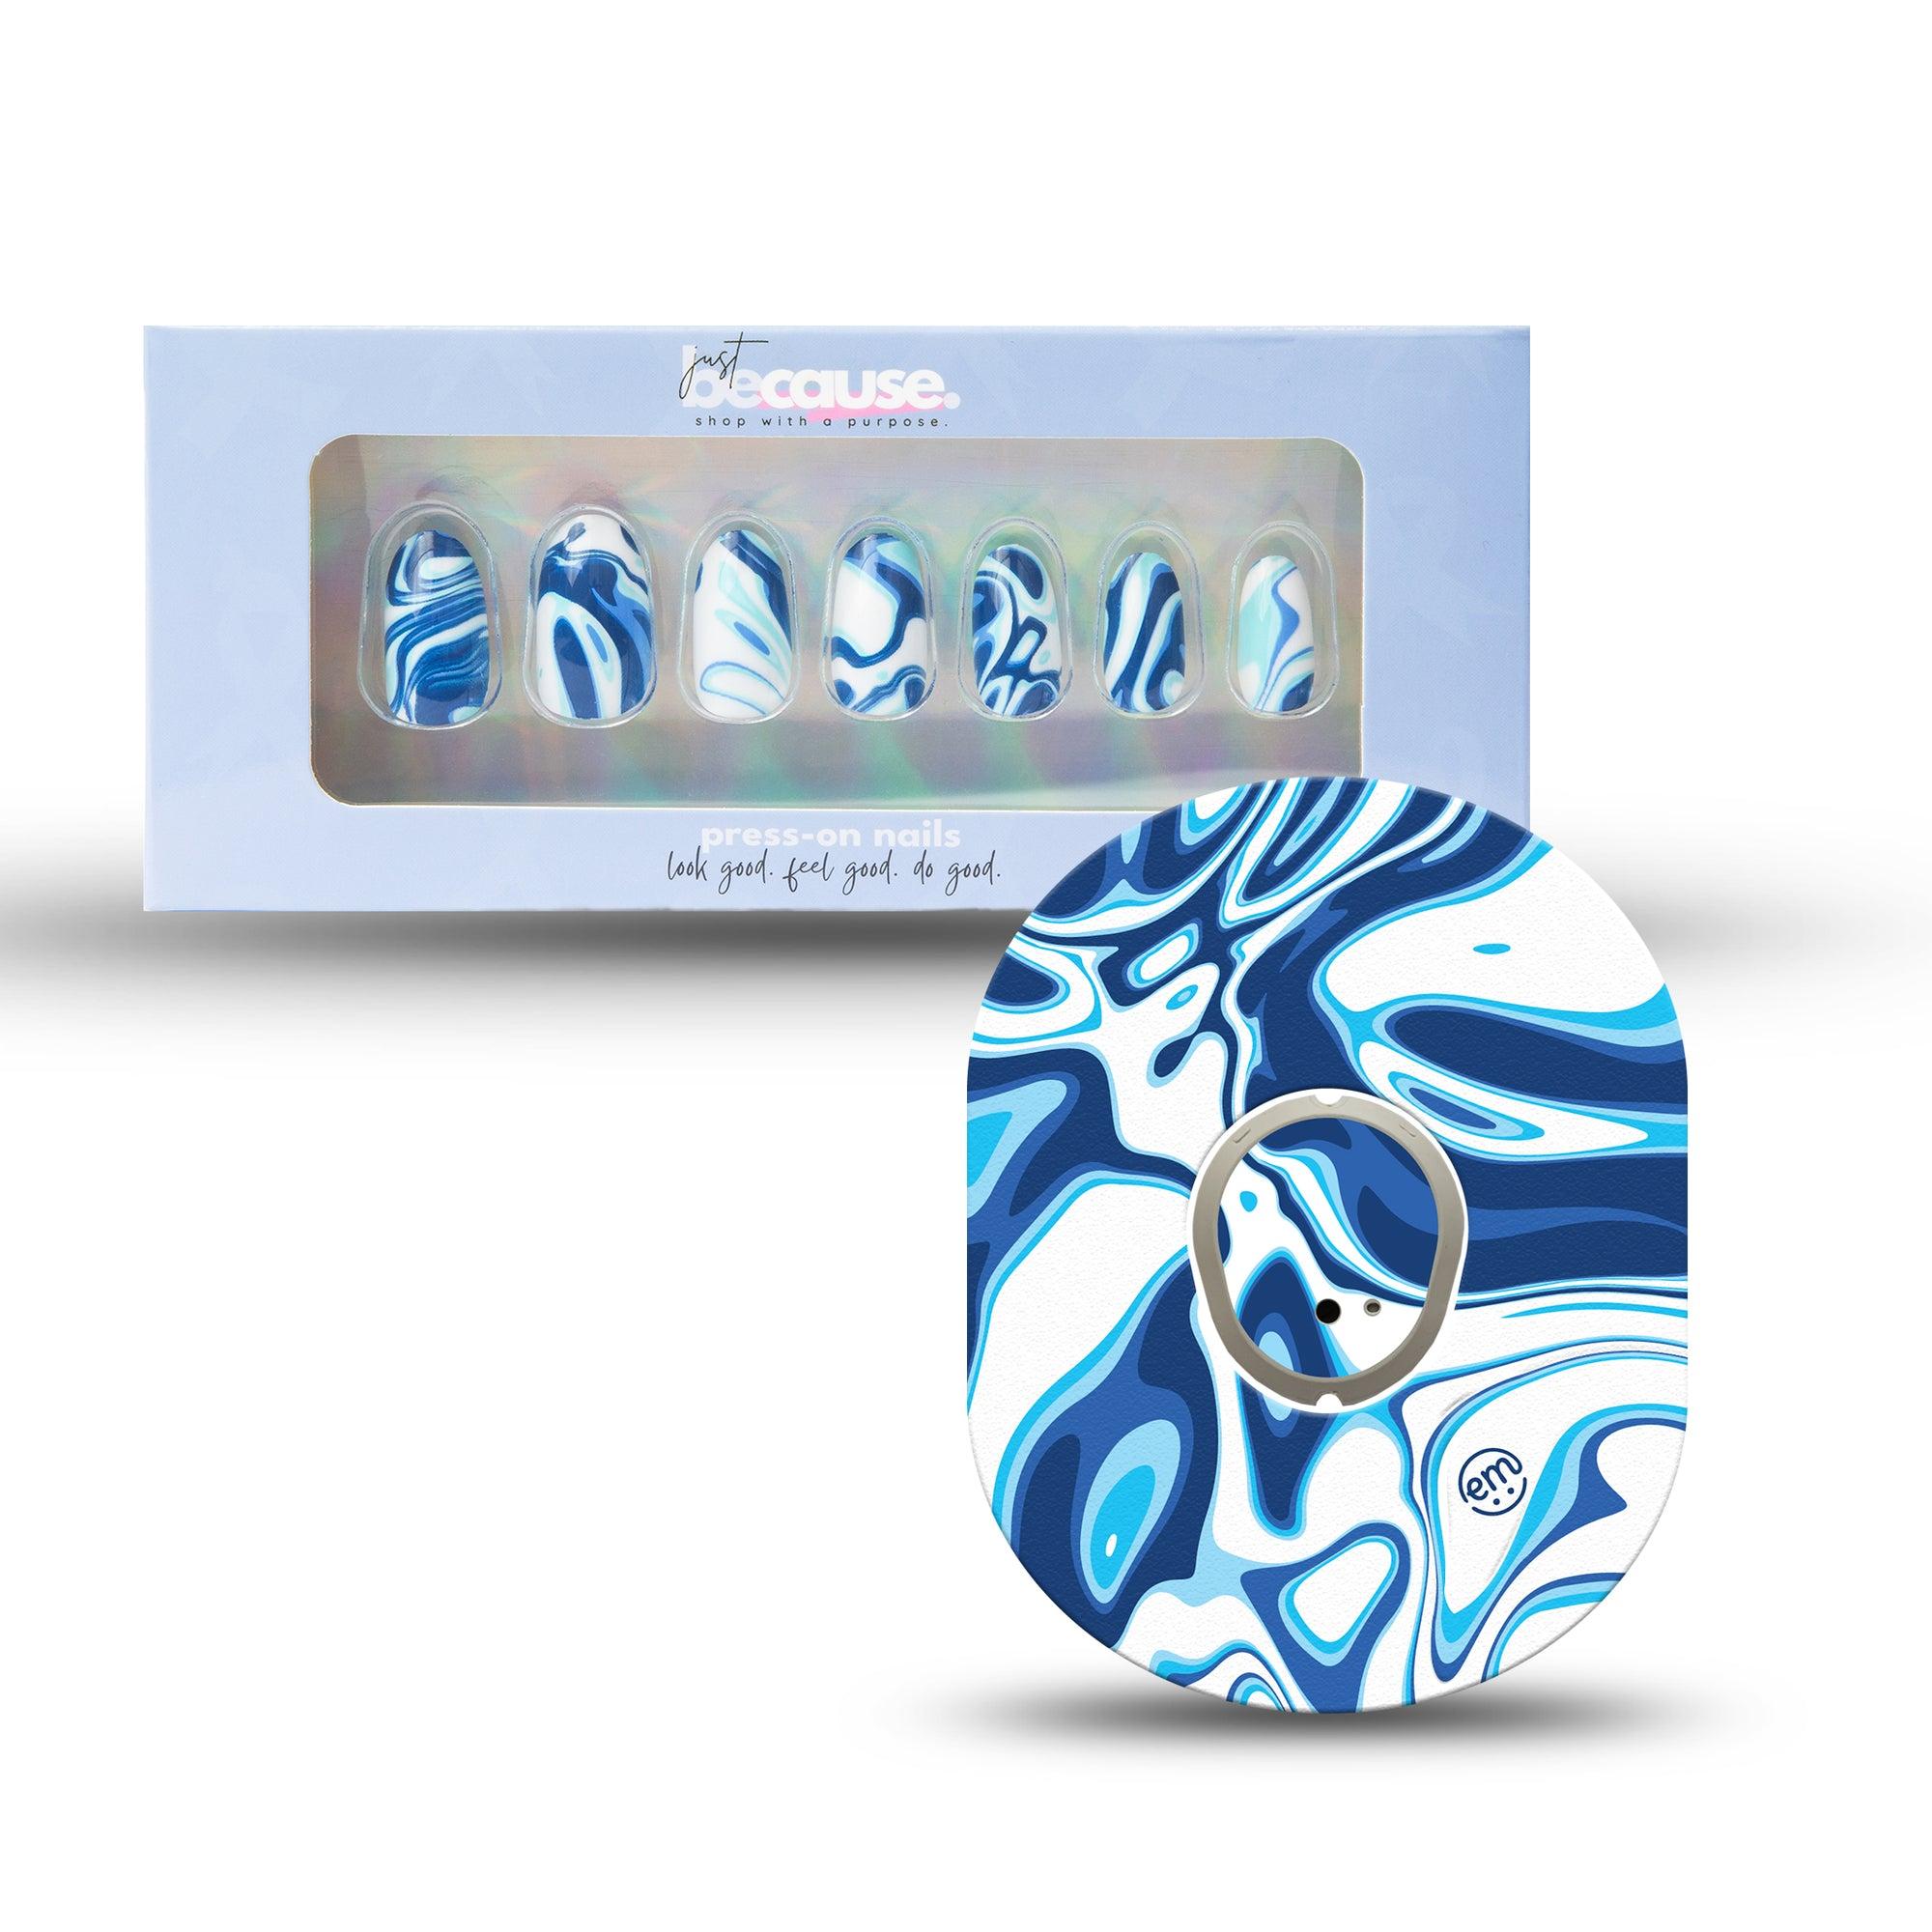 Just BeCause 24 Pcs ABS Press on nails Medium, Blue and white marble Fake Nails set with matching Blue and white marble Dexcom G7 Fixing Ring and Center Sticker, Support T1D - ExpressionMed.com	